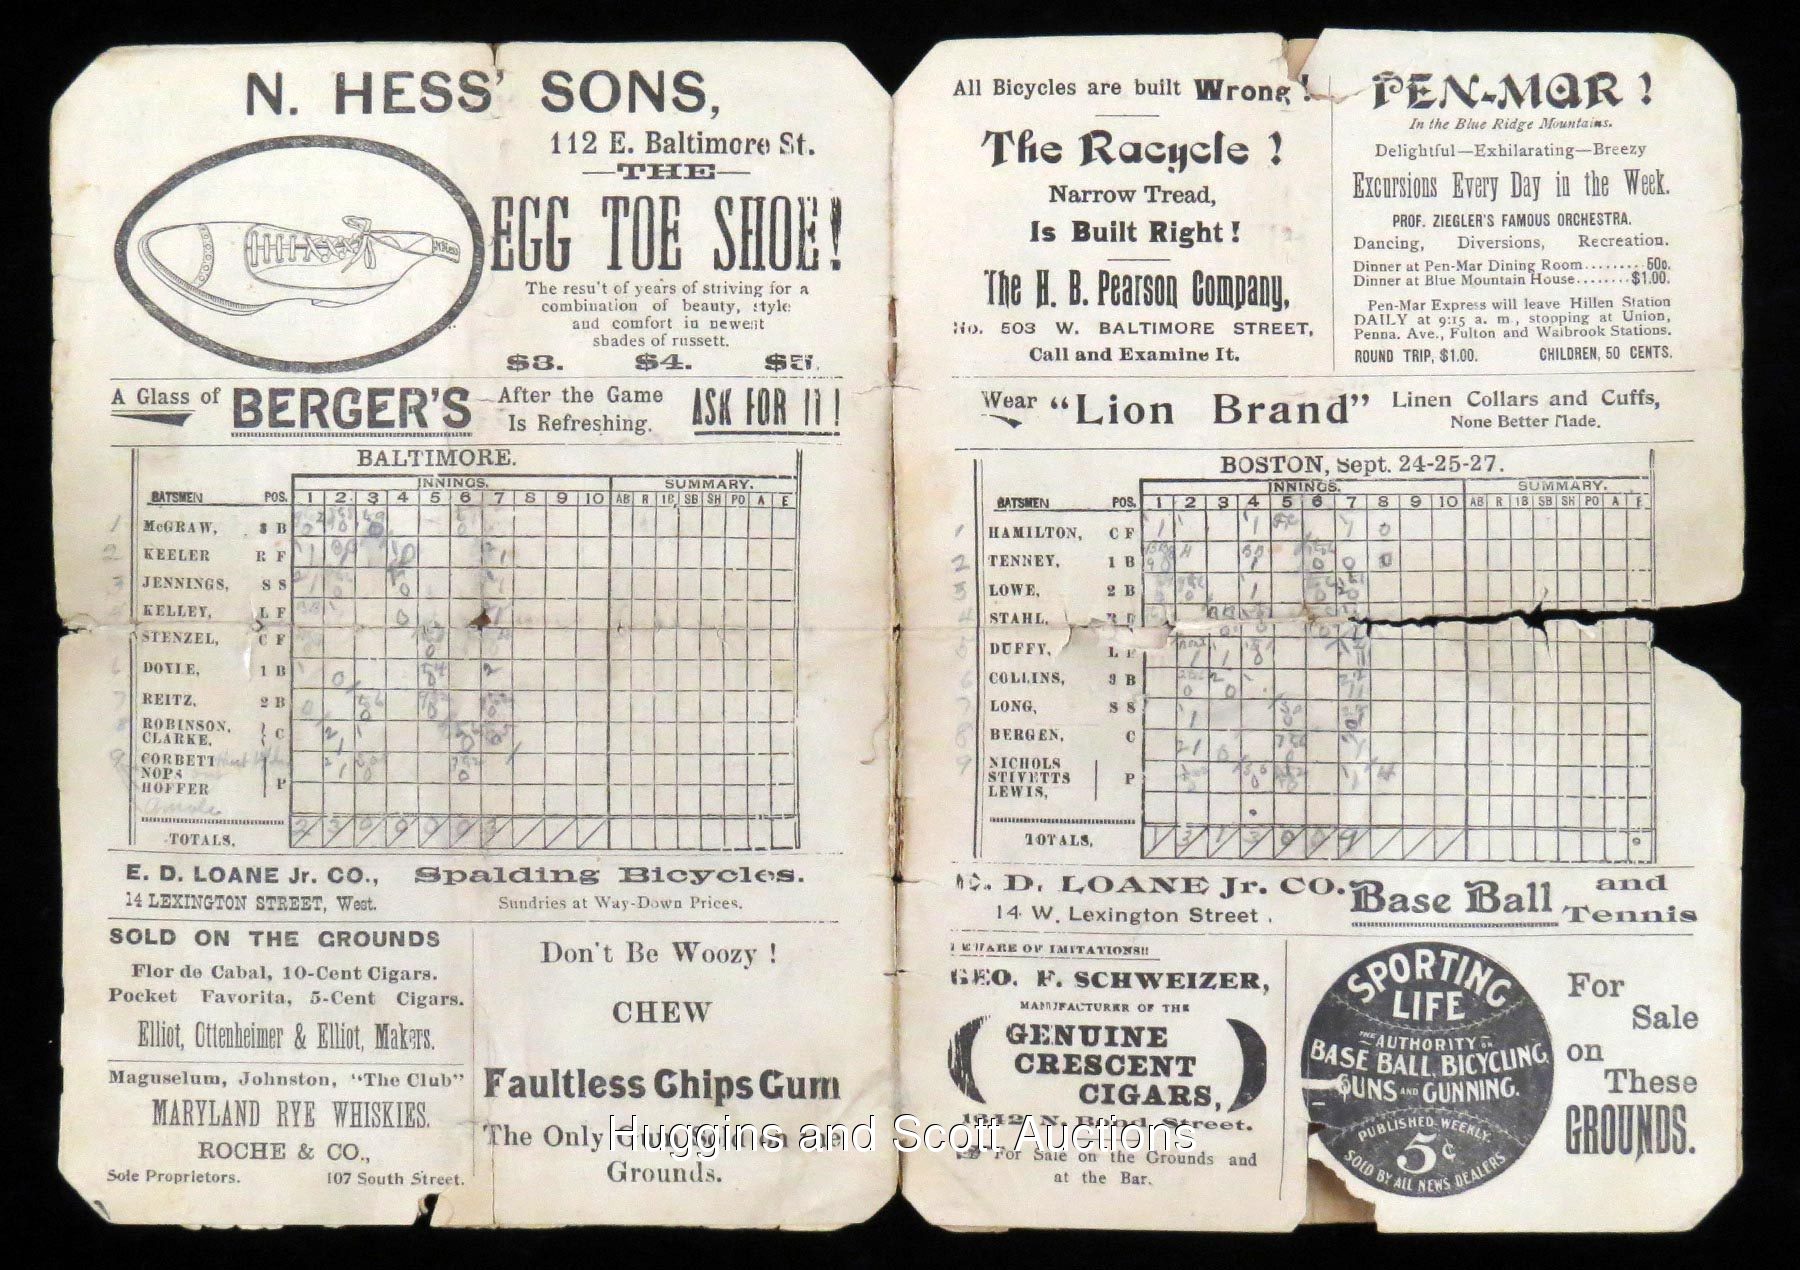 Score Card from the 1897 Boston Baltimore Series.